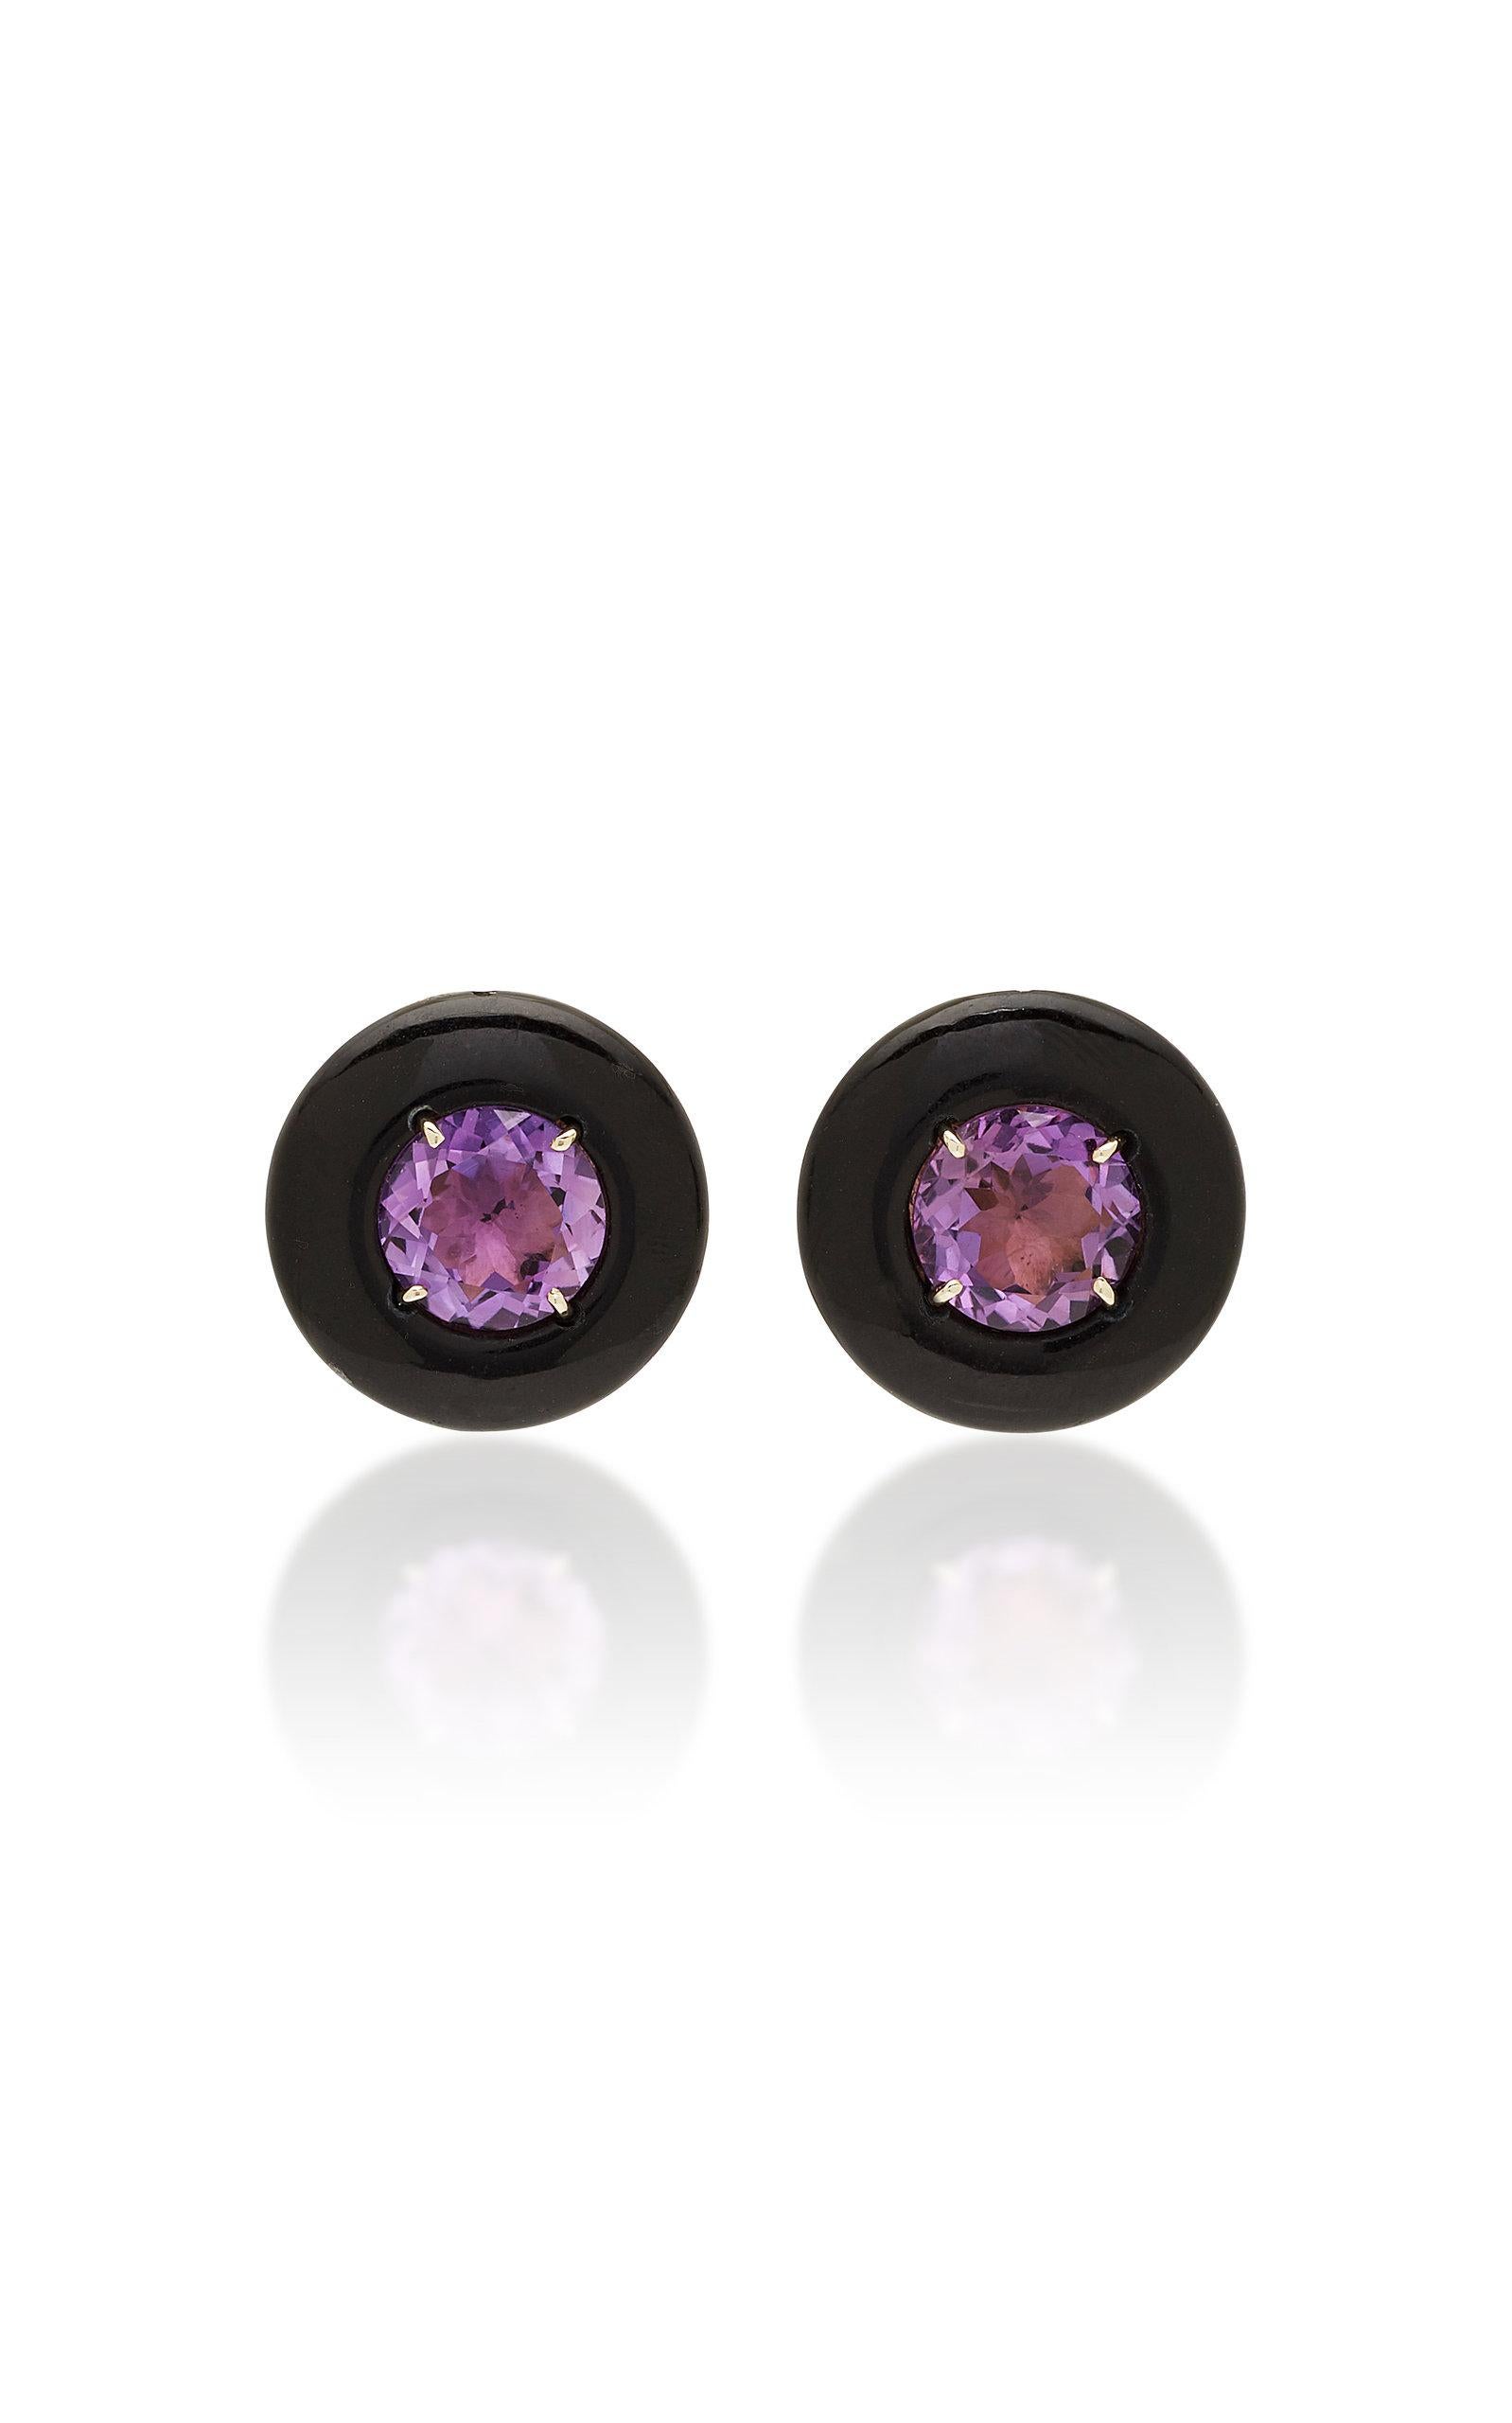 Sorab & Roshi Black Onyx Button Earrings with Faceted Amethyst Center In New Condition For Sale In Greenwich, CT